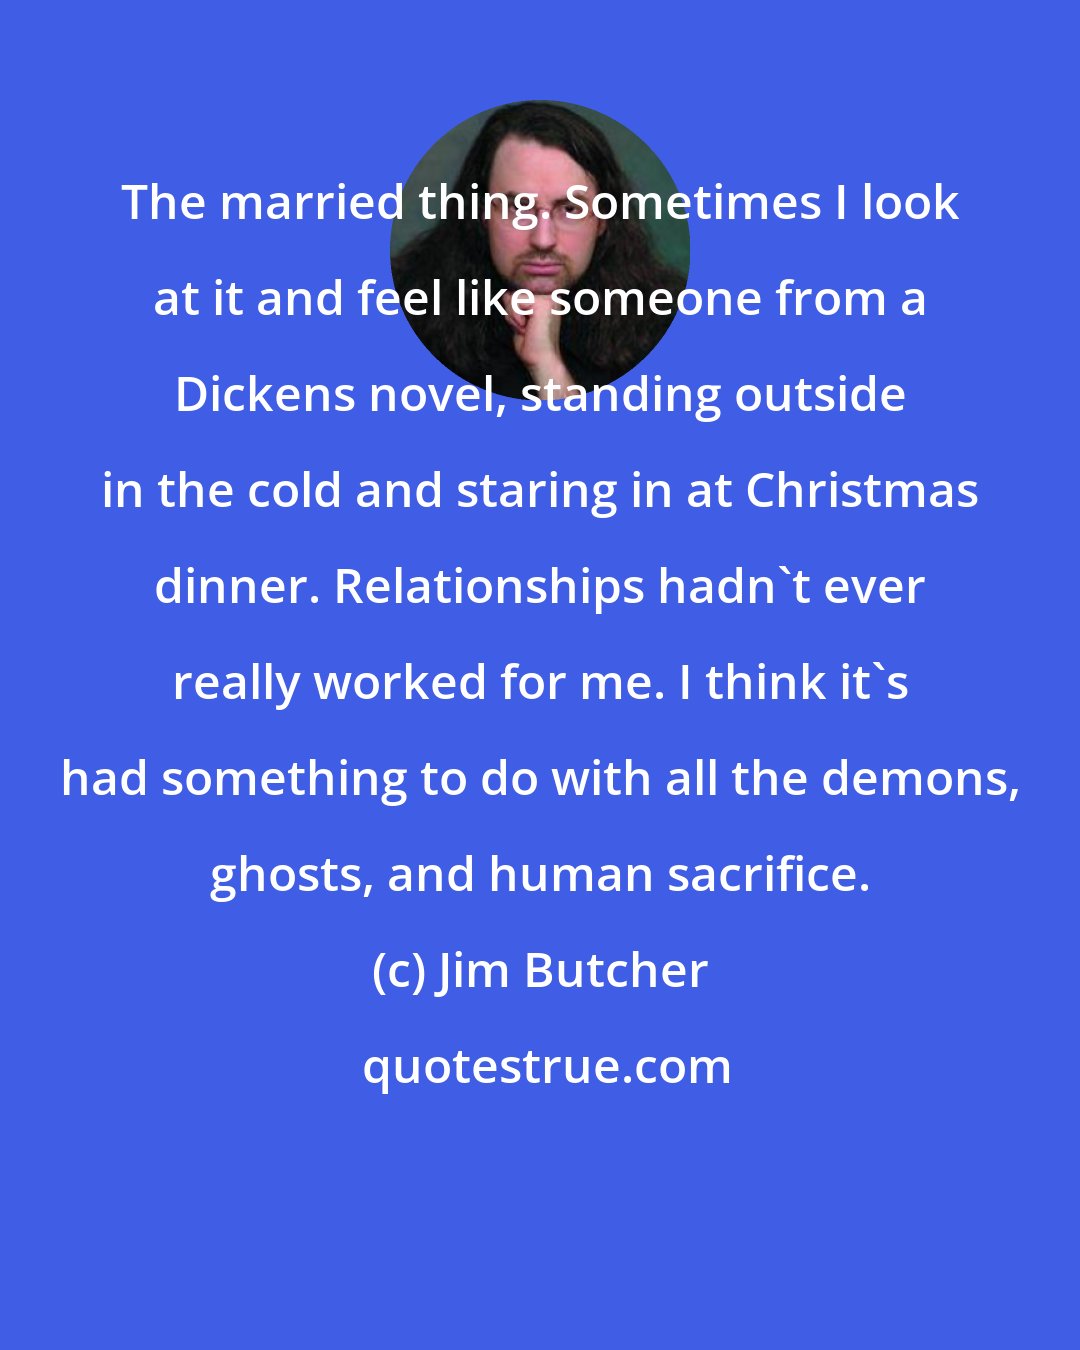 Jim Butcher: The married thing. Sometimes I look at it and feel like someone from a Dickens novel, standing outside in the cold and staring in at Christmas dinner. Relationships hadn't ever really worked for me. I think it's had something to do with all the demons, ghosts, and human sacrifice.